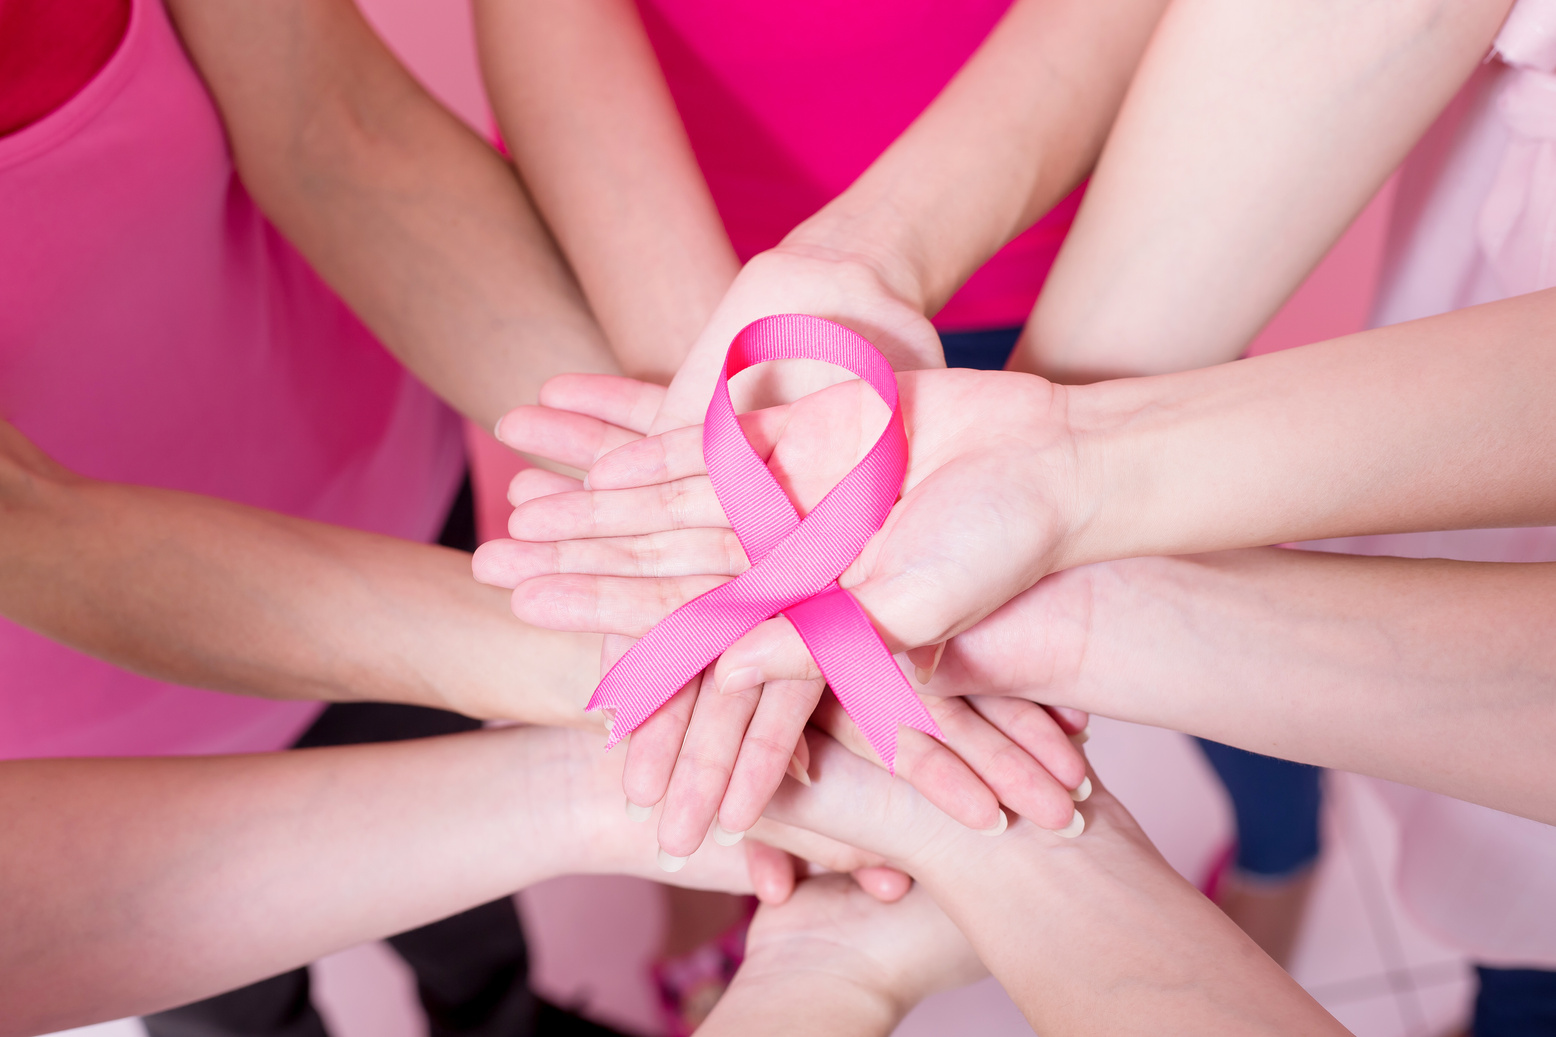 Women with Breast Cancer Prevention